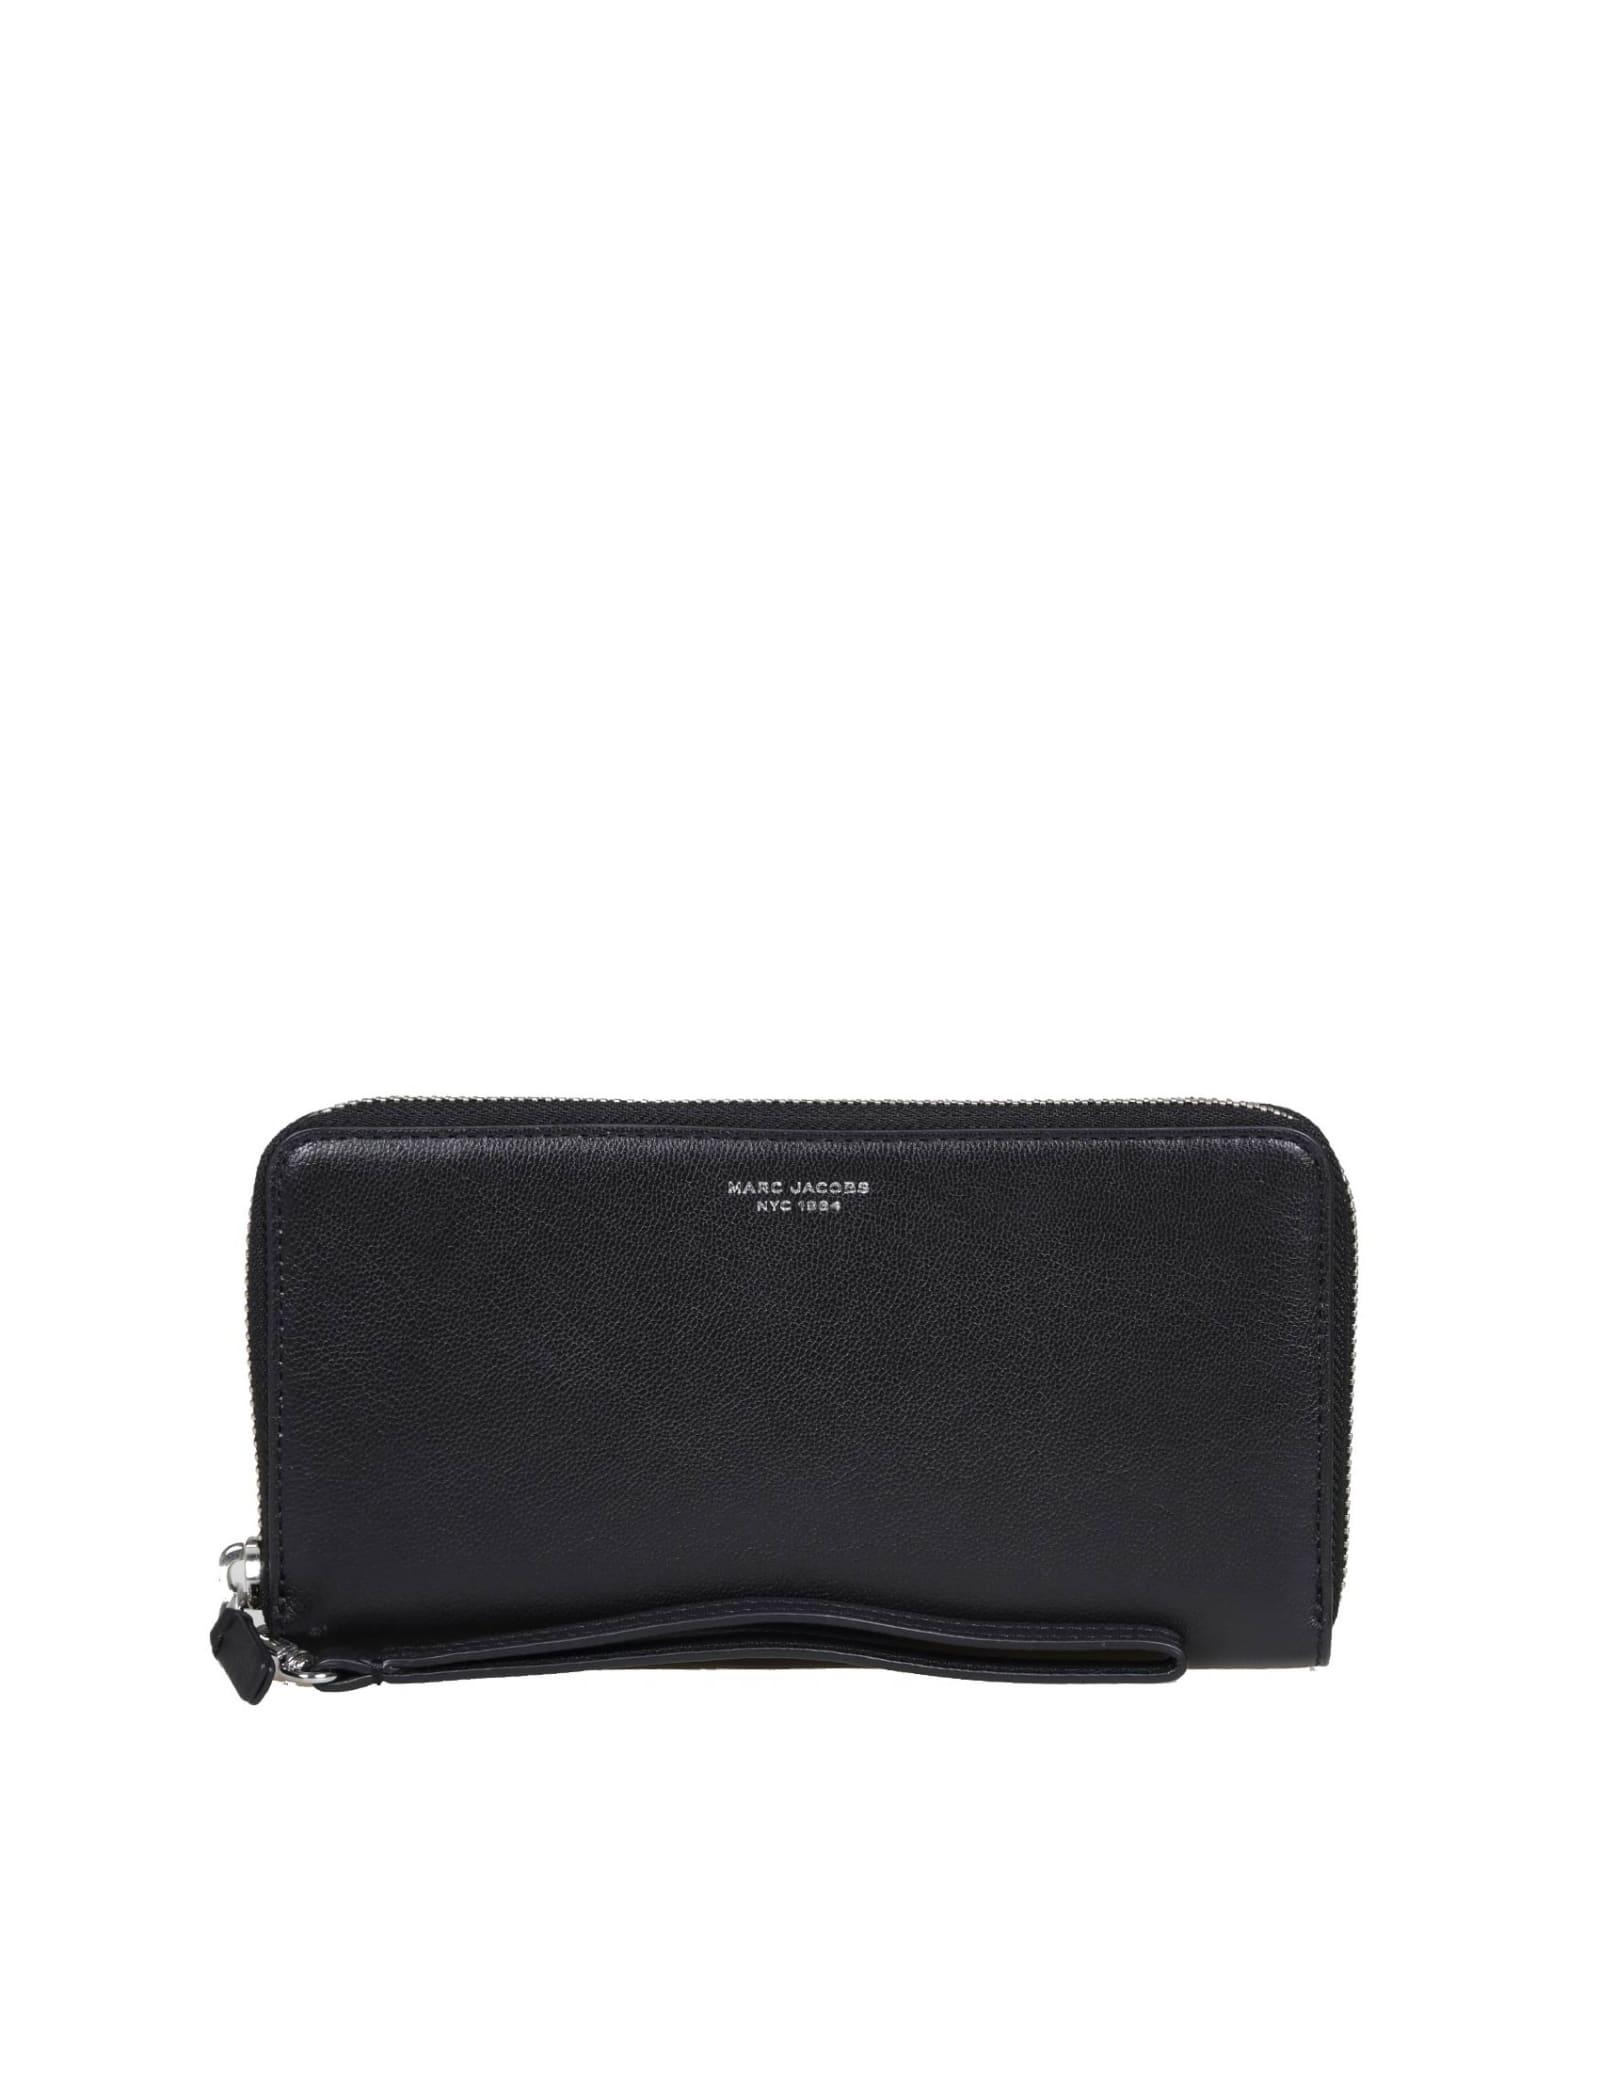 Black Chain Continental Wallet Bag by Marc Jacobs Handbags for $20